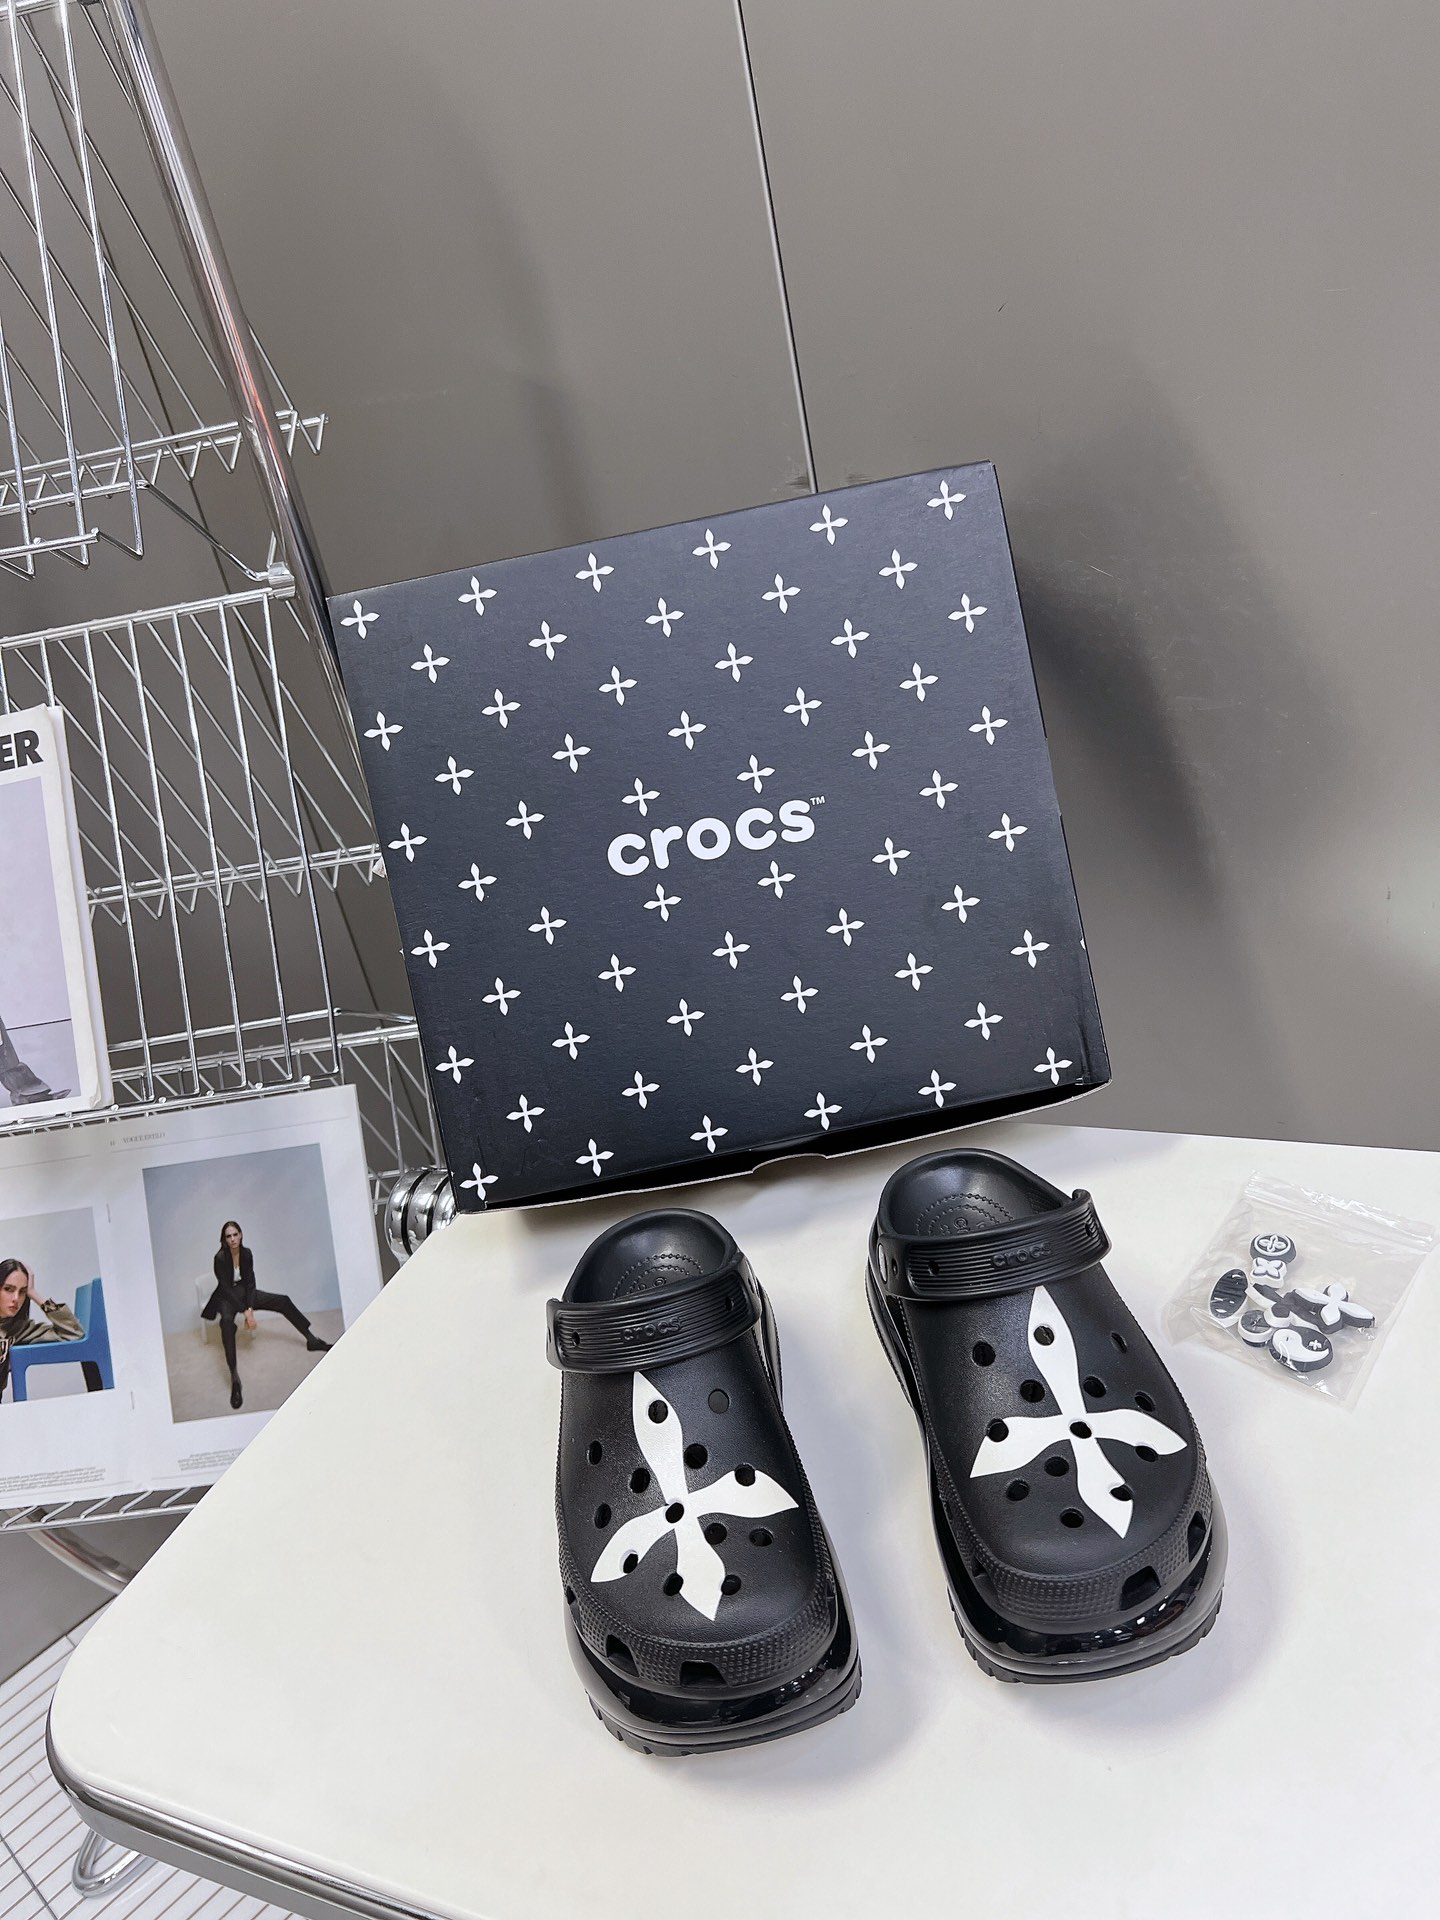 Smfk Shoes Crocs Rubber Spring/Summer Collection